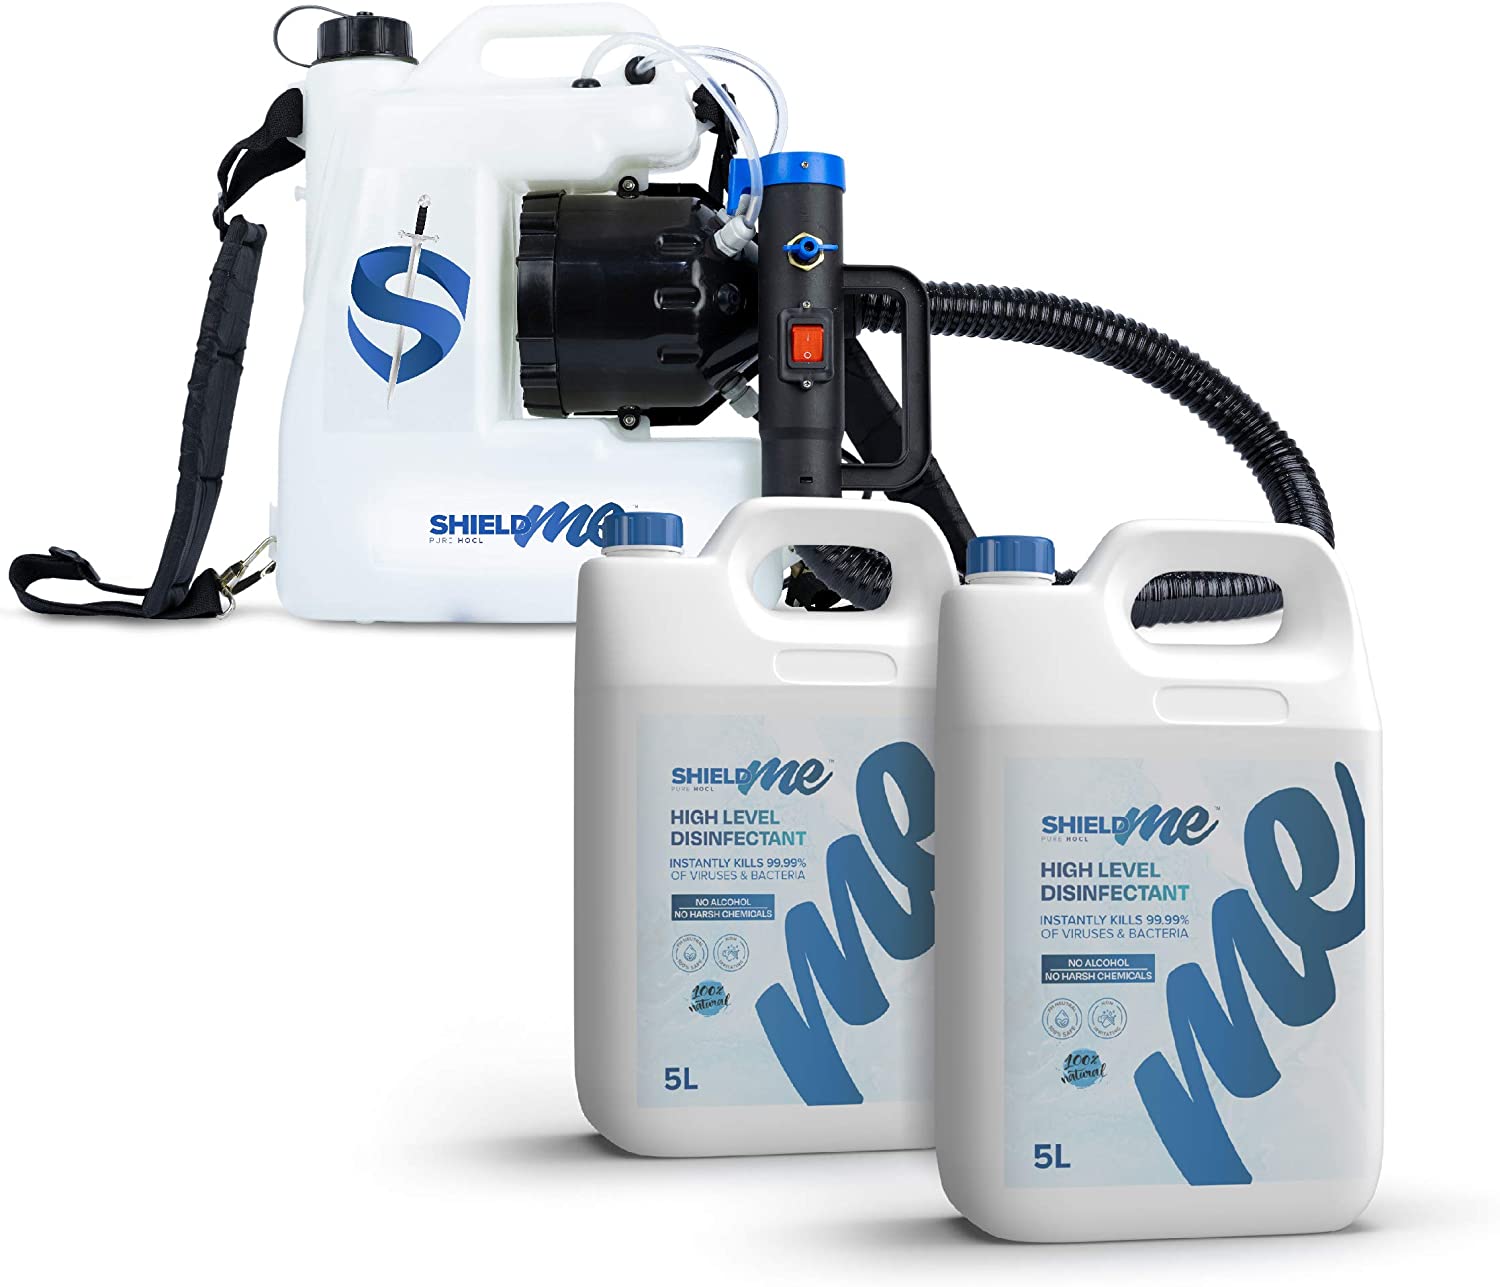 Disinfection Fogging Spray Machine12 Liters Capacity & 10 Liters High Level Disinfectant 100% Natural - SHIELDme